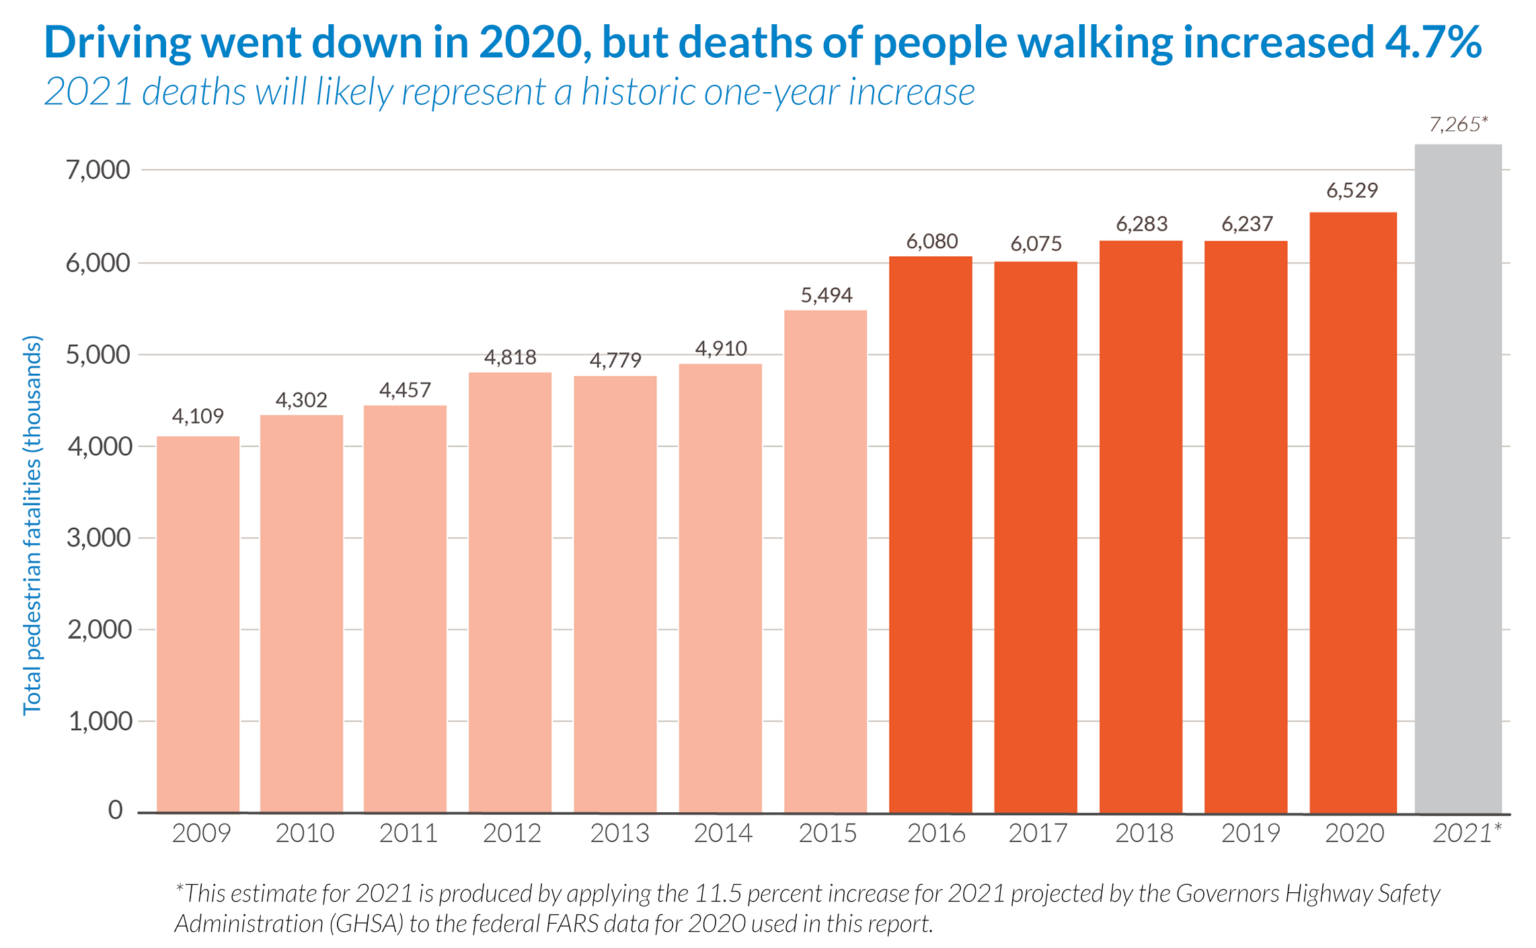 Annual Pedestrian Deaths 2009 to 2021 Source Smart Growth America